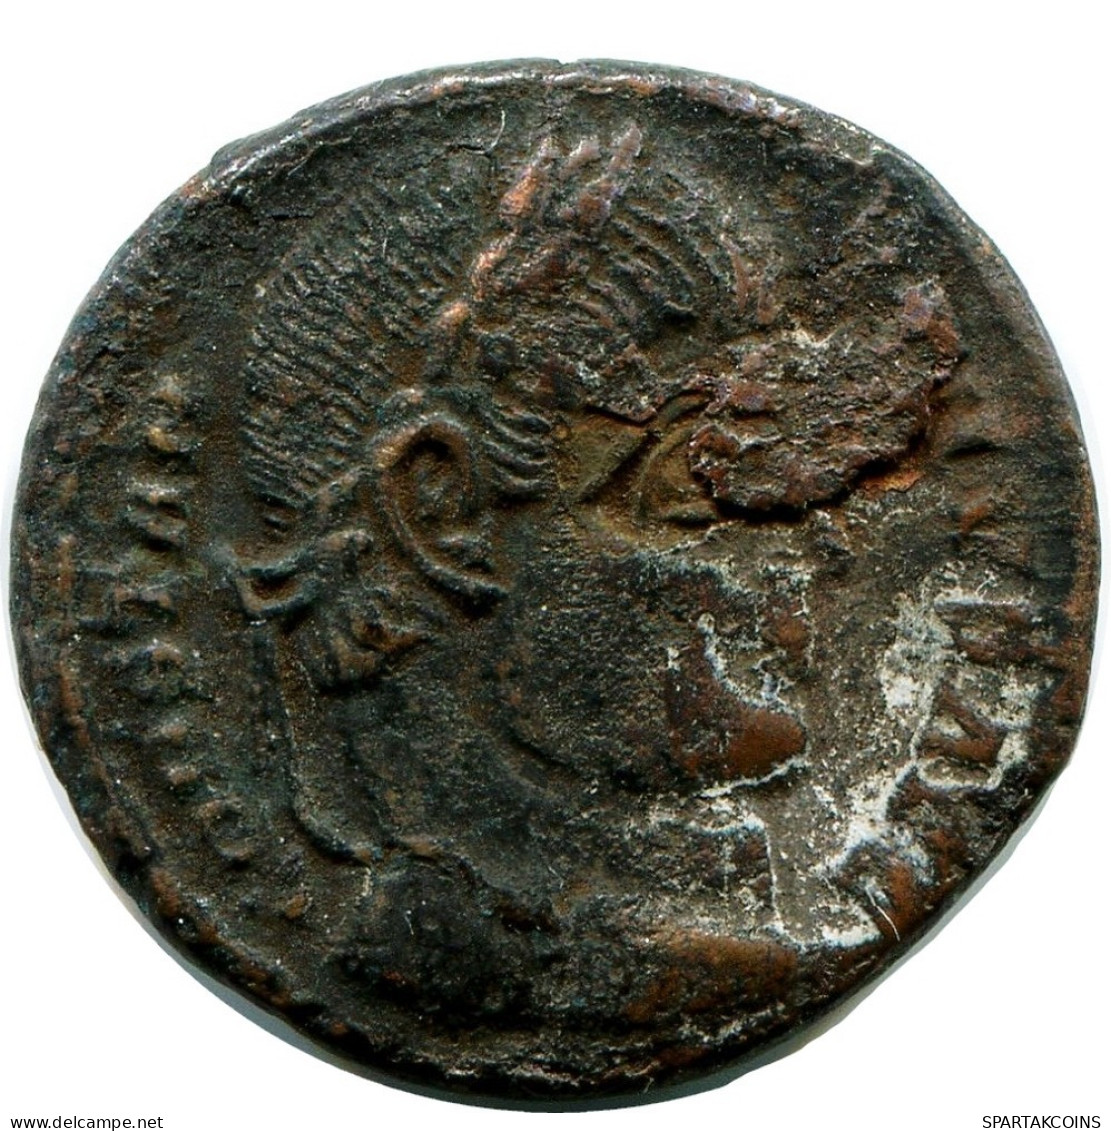 CONSTANTINE I MINTED IN FROM THE ROYAL ONTARIO MUSEUM #ANC11093.14.U.A - Der Christlischen Kaiser (307 / 363)